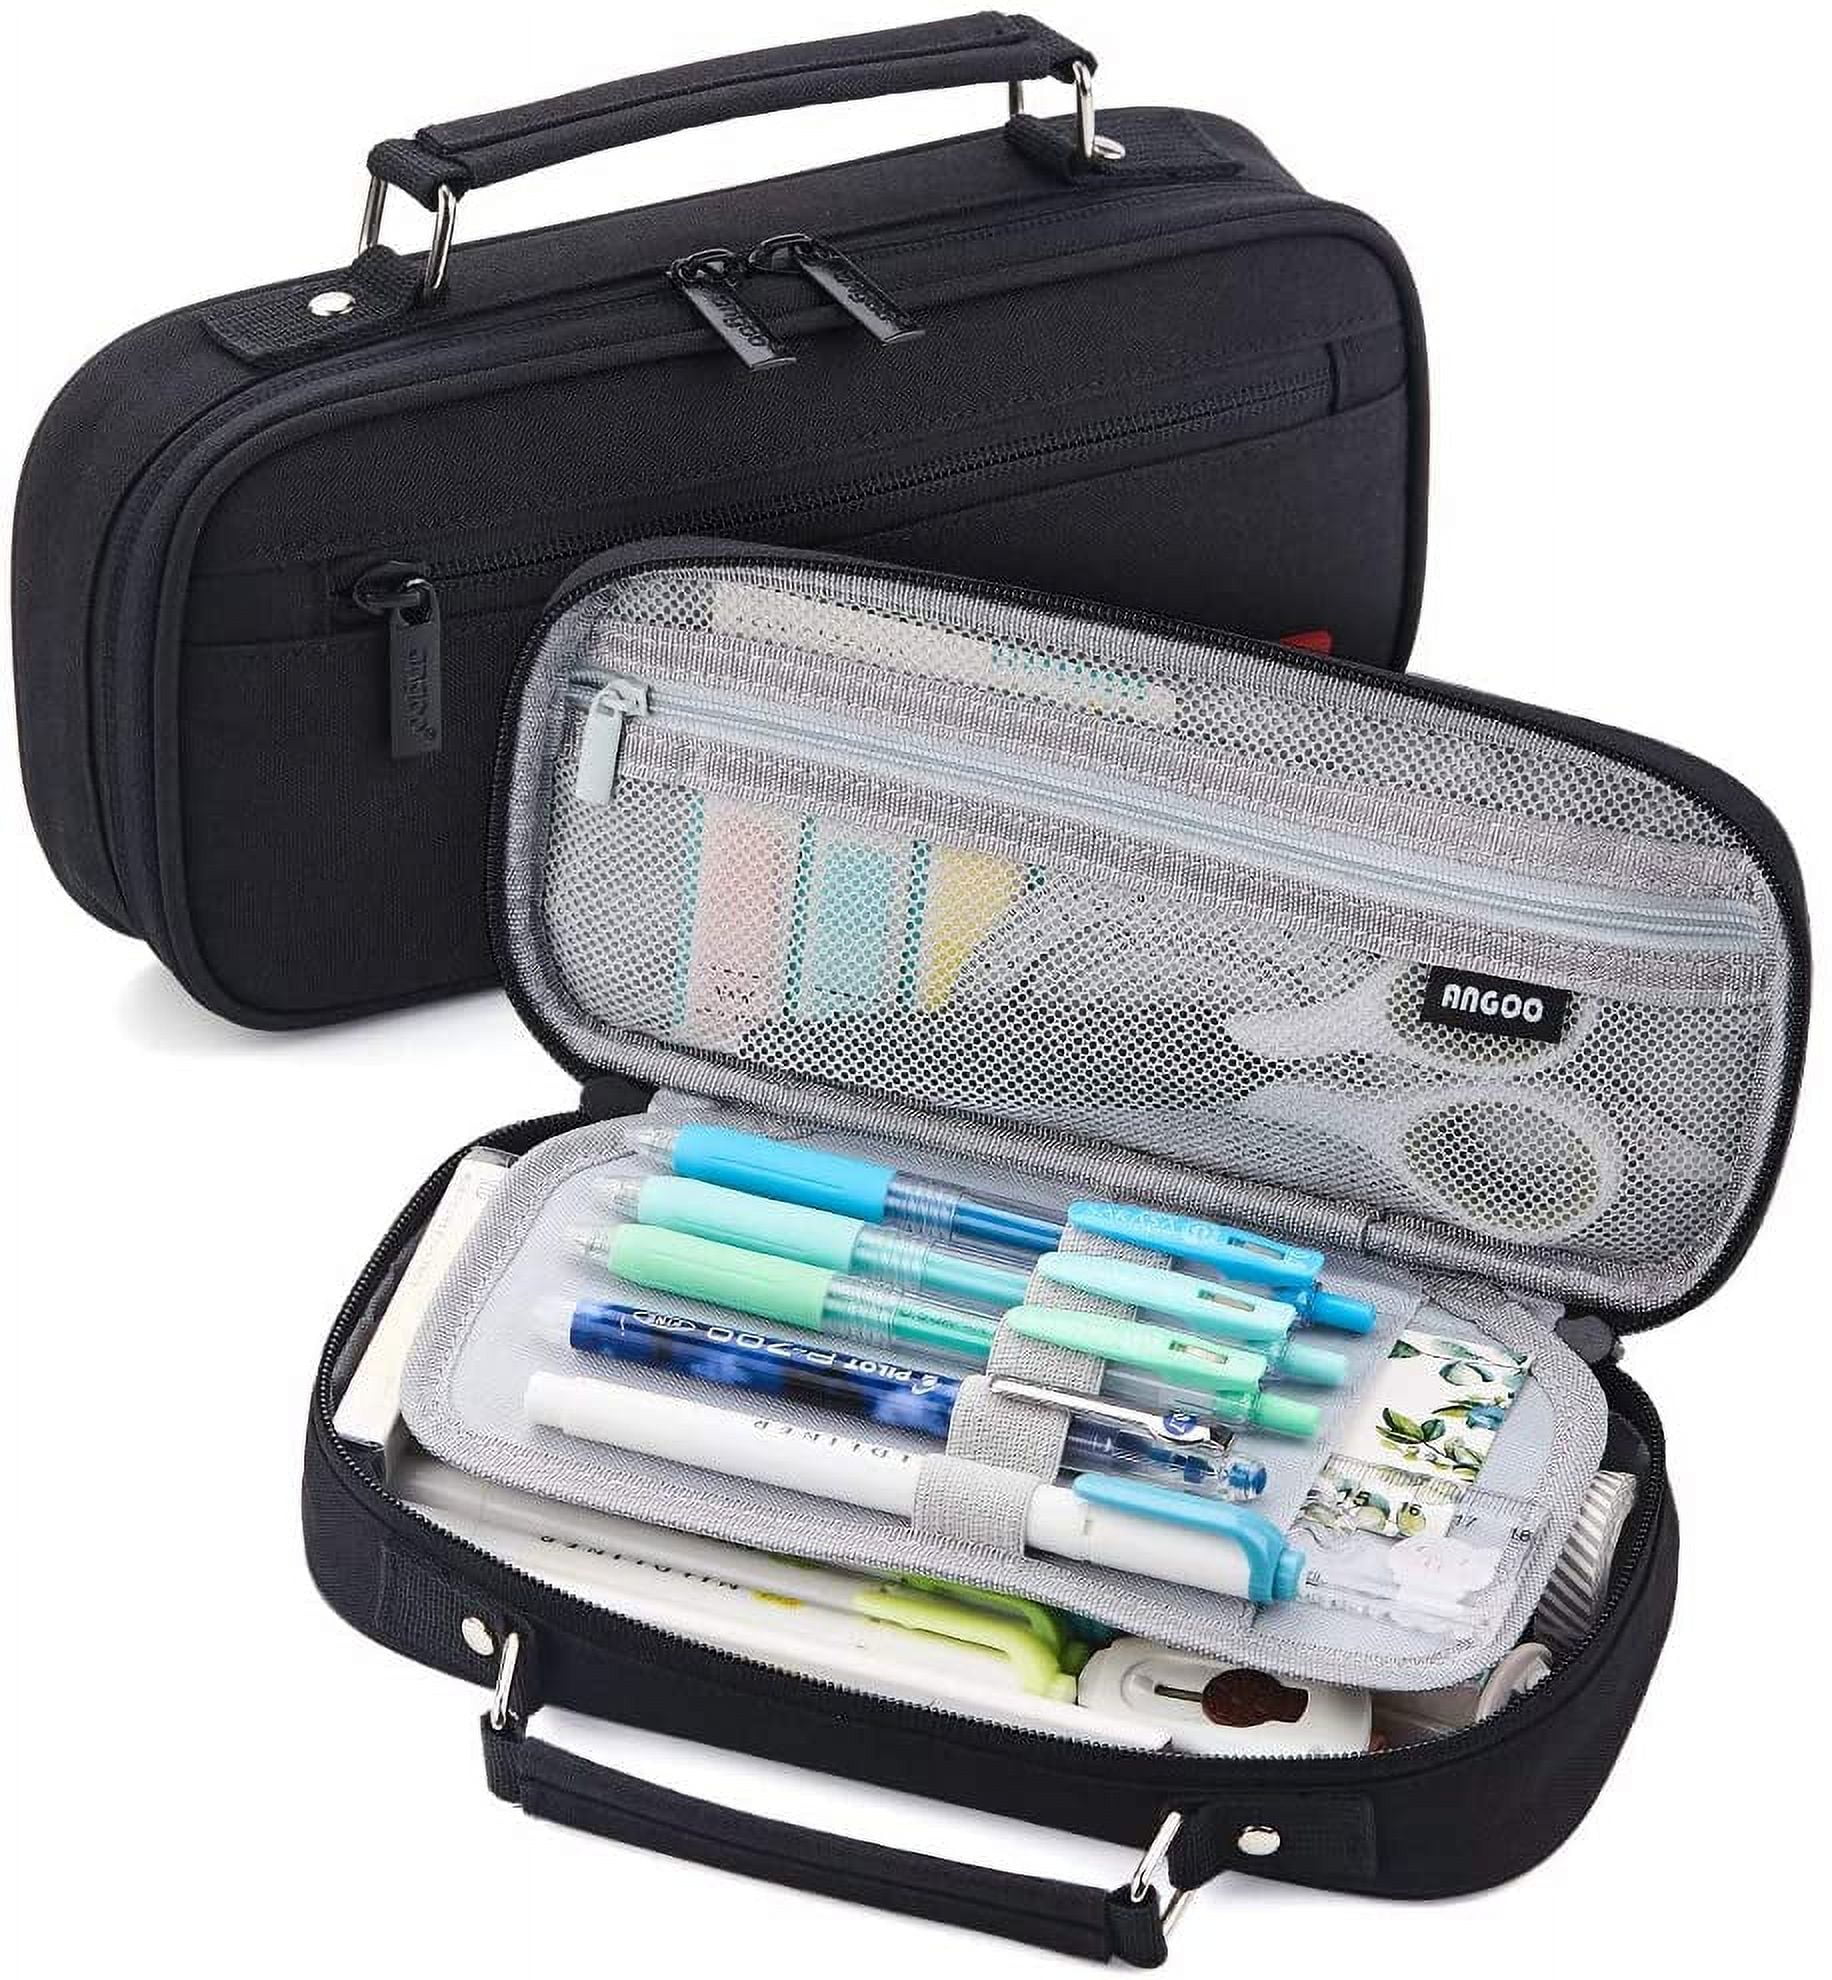 Large Pencil Case Big Capacity 3 Compartments Pencil Pouch for Teen Boys  Girls School Students 